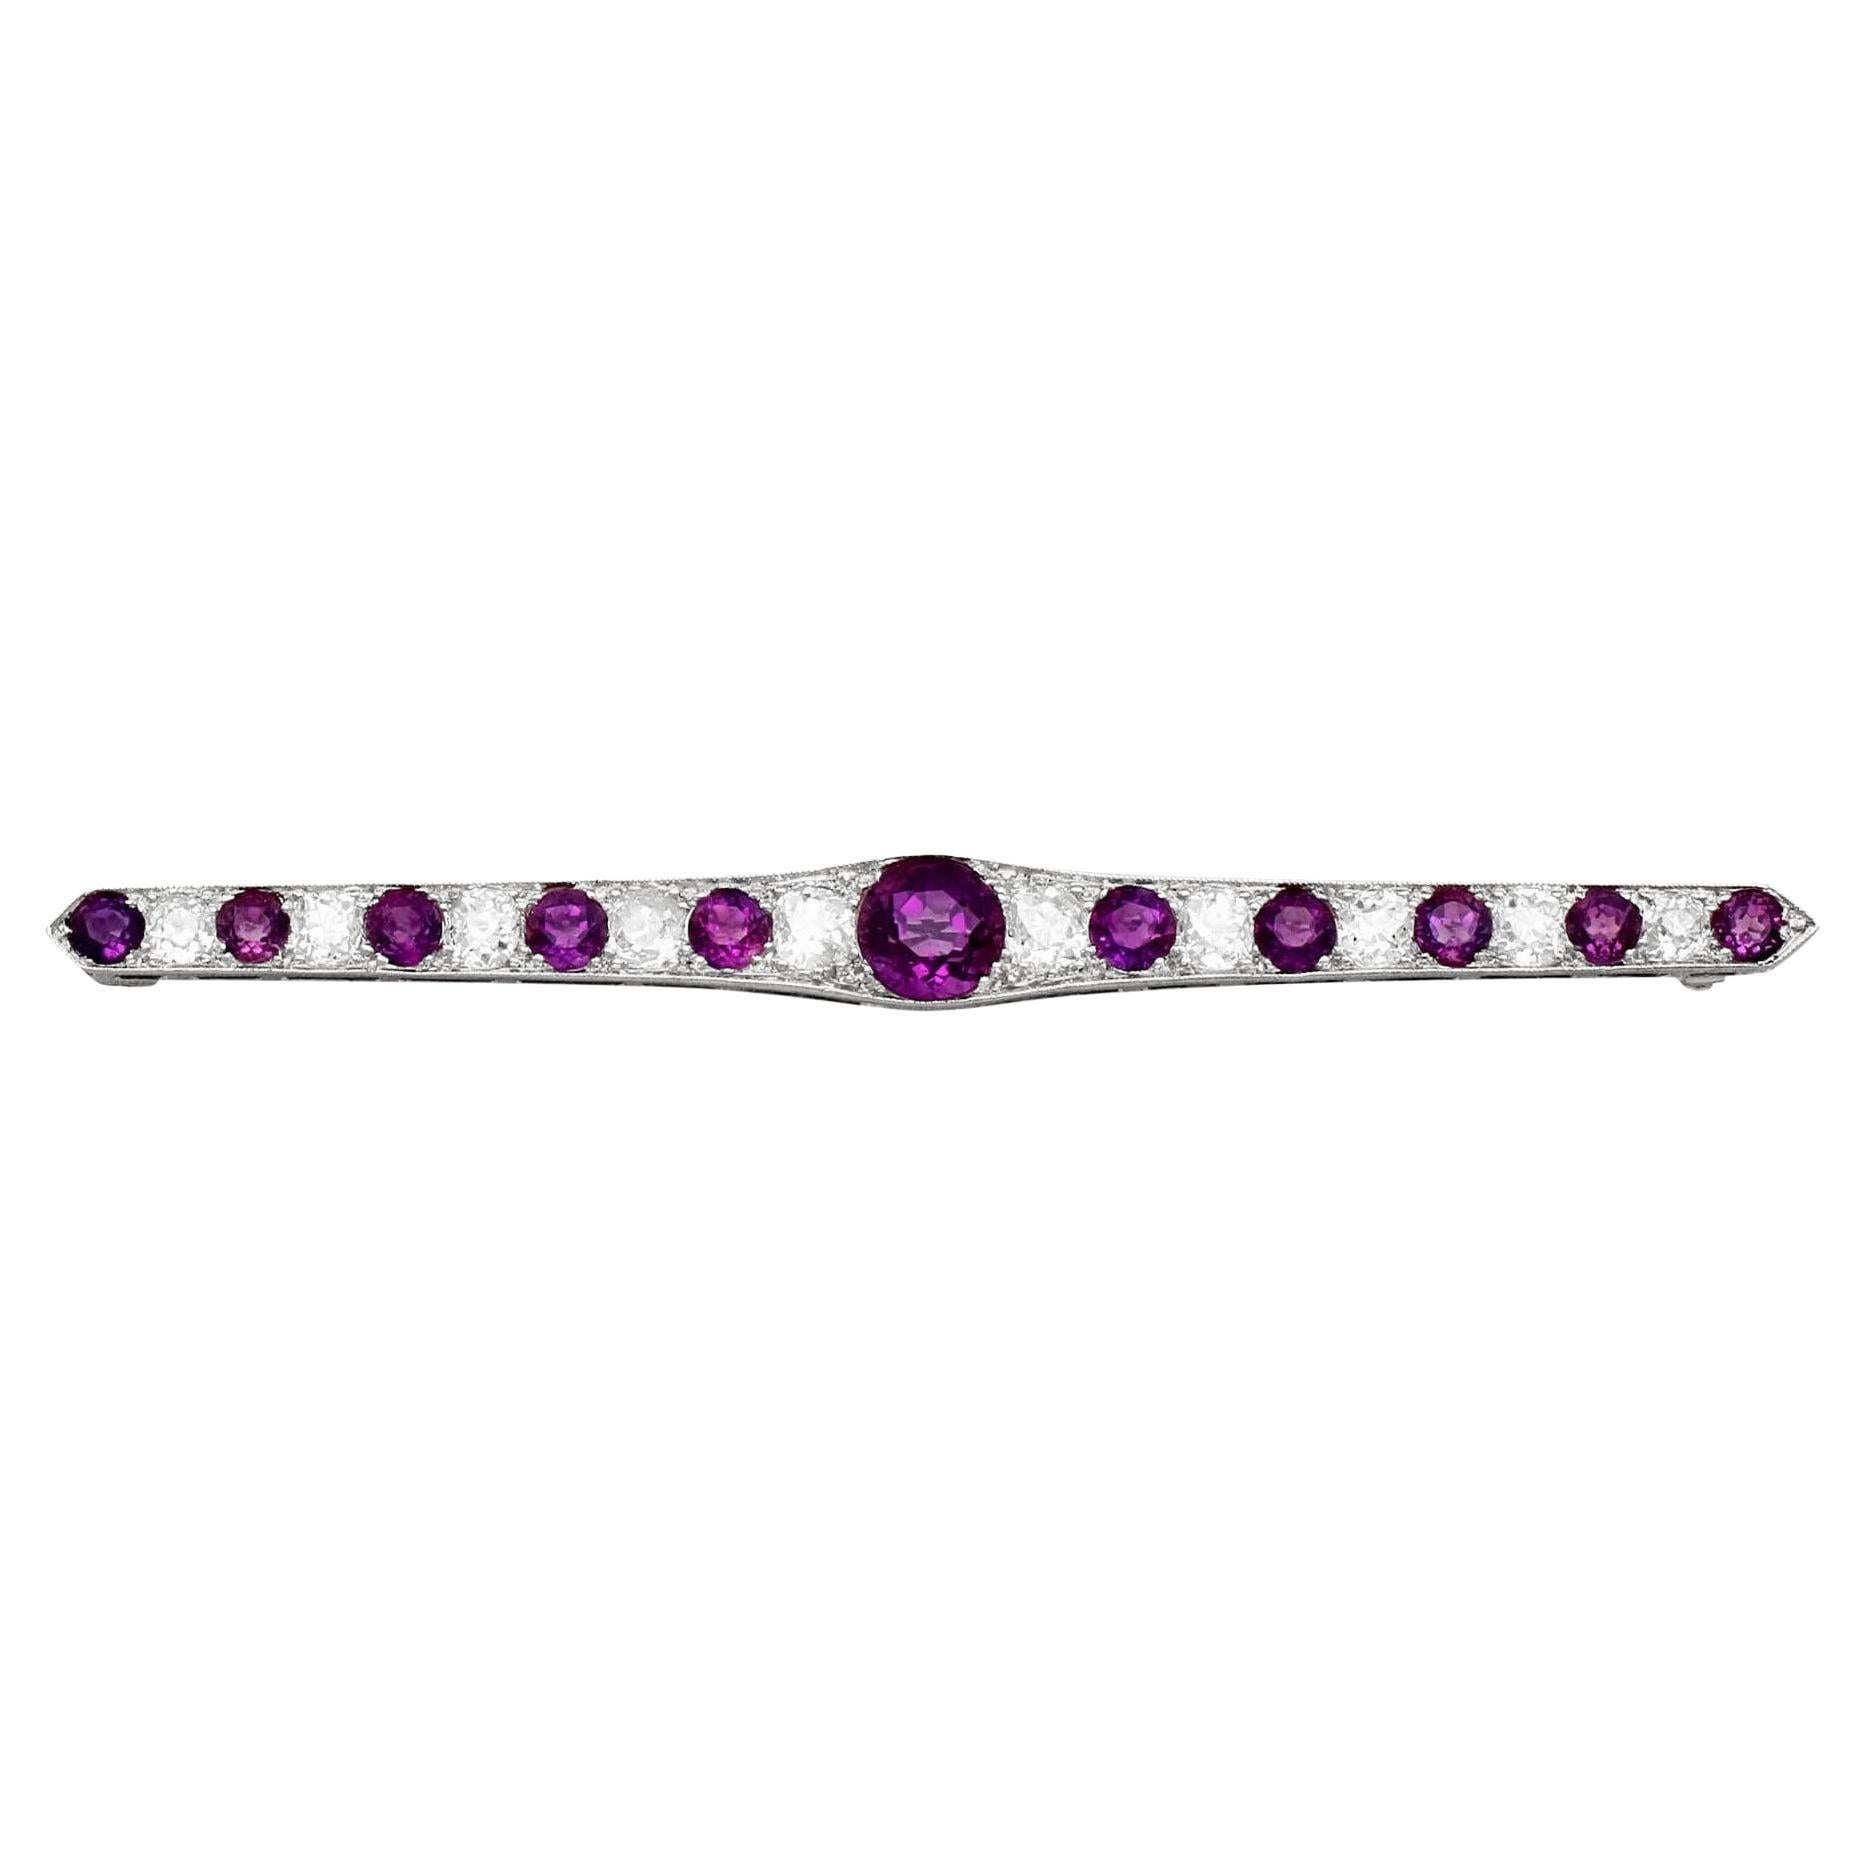 Antique Amethyst and Diamond Bar Brooch in White Gold